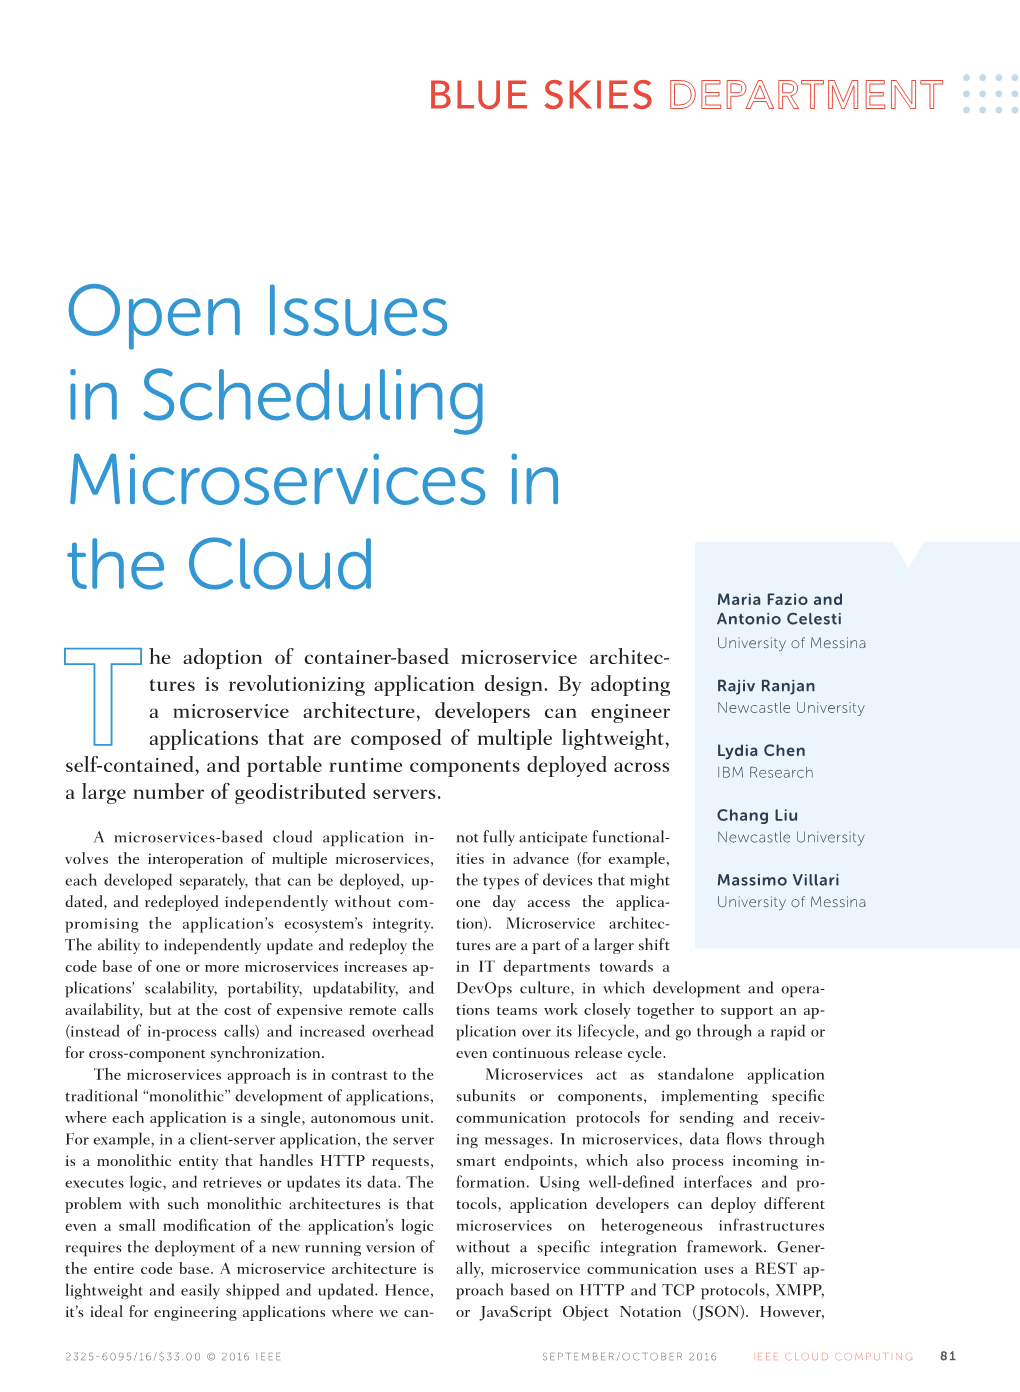 Open Issues in Scheduling Microservices in the Cloud